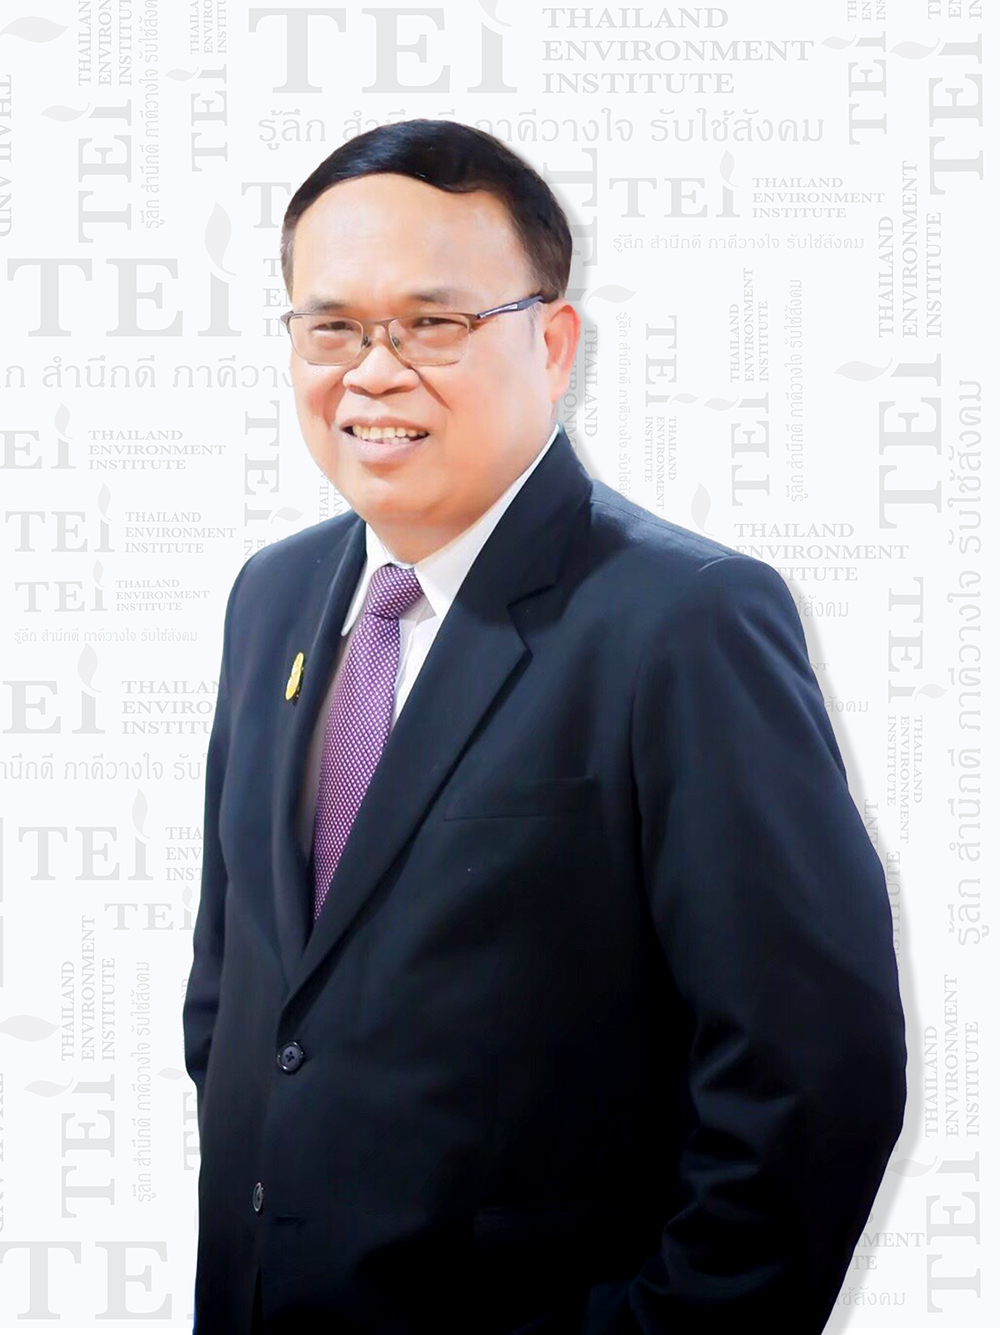 TEI [Thailand Environment Institute] | There is a good foundation for the  development of resource efficiency and sustainability